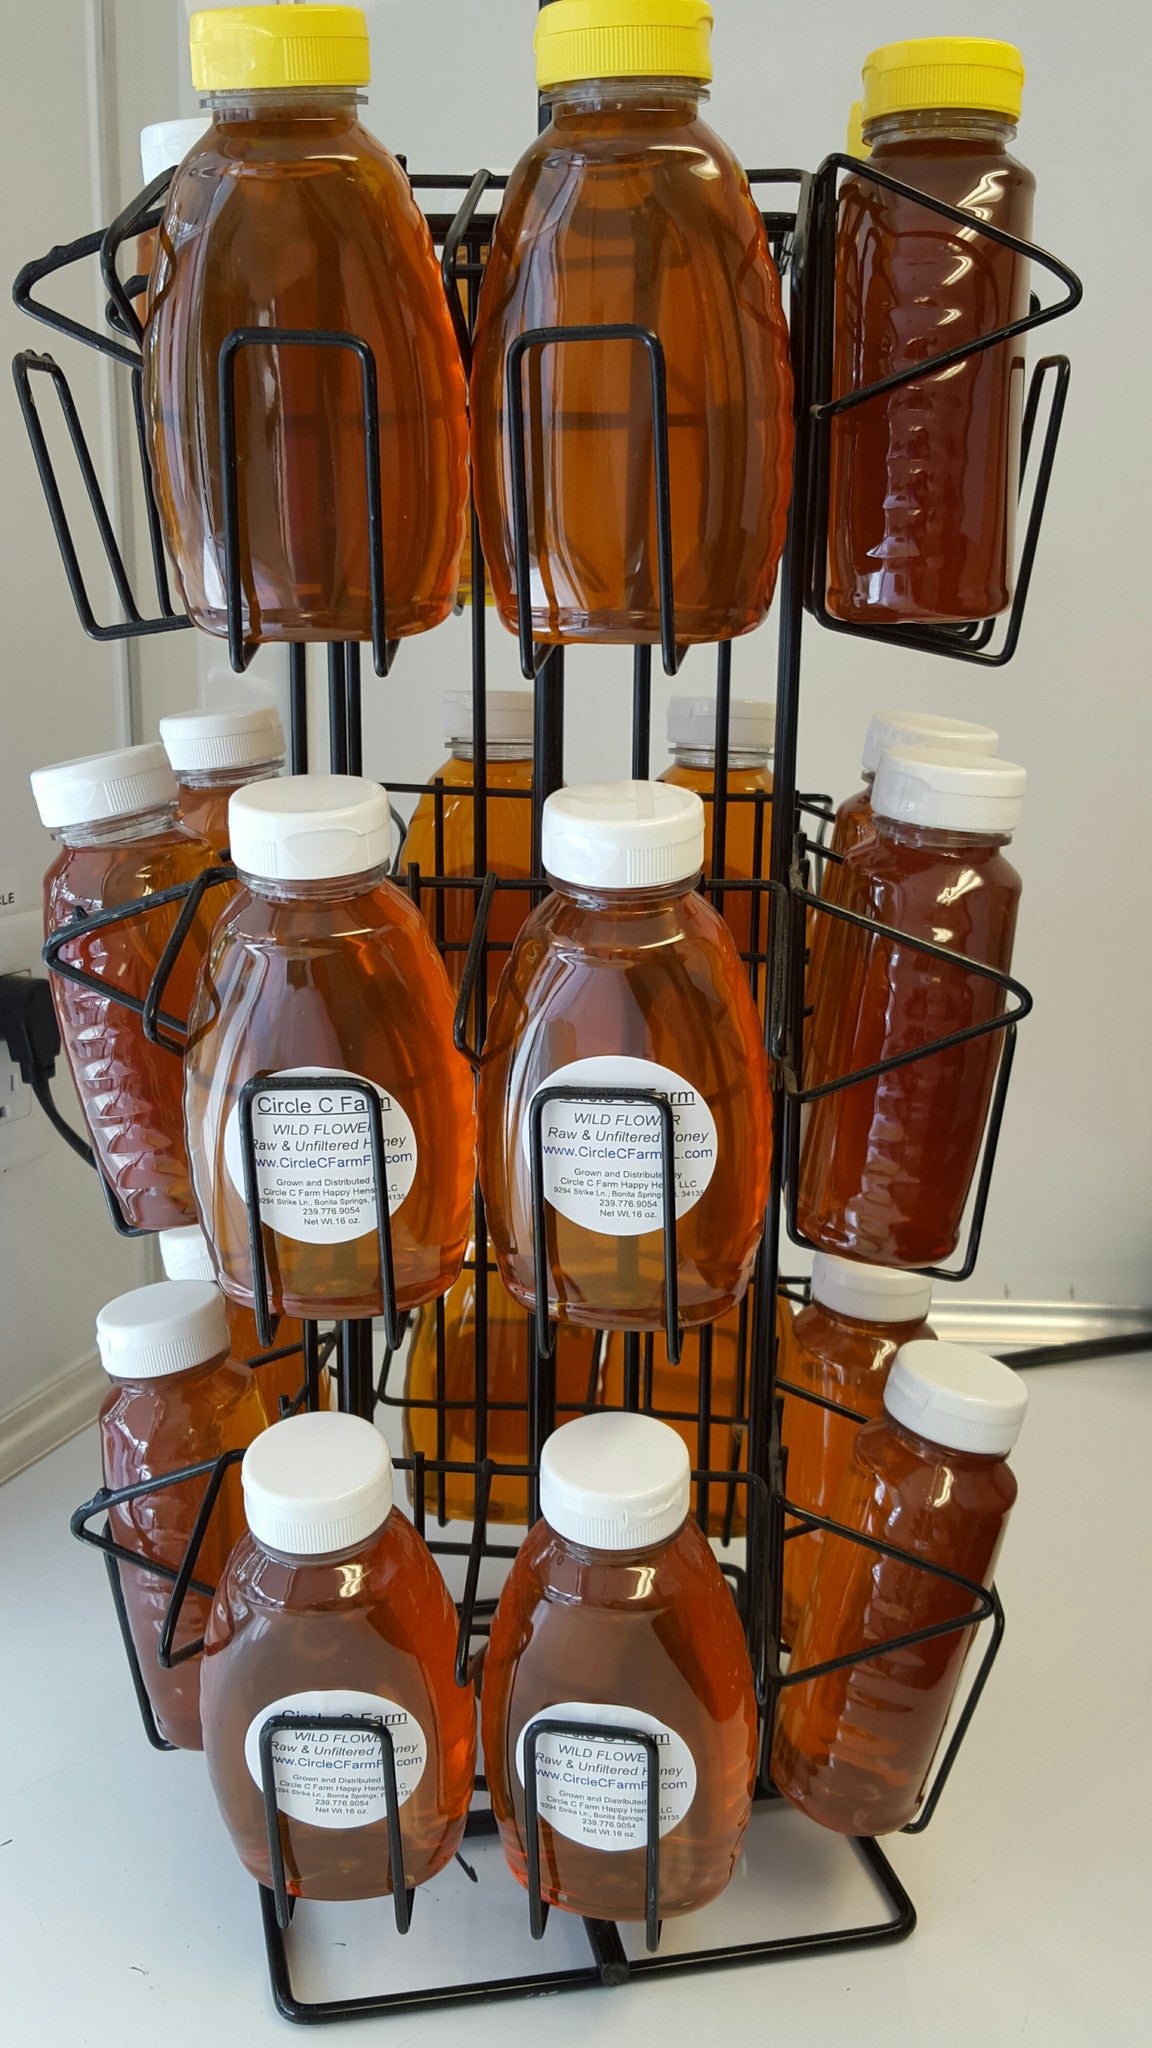 Circle C Farm Honey... the Amazing Health Benefits of Our 100% Raw Unfiltered Local Honey